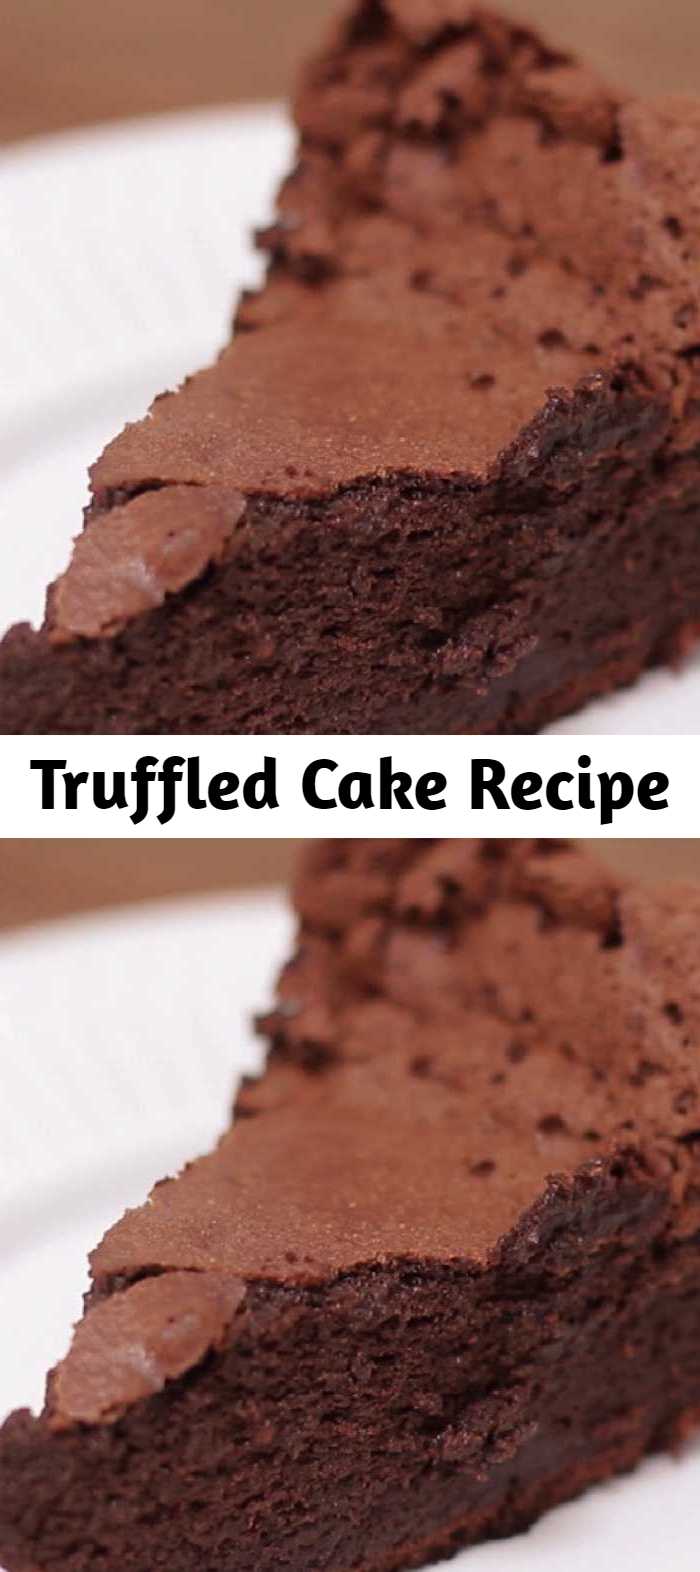 Truffled Cake Recipe - Enjoy the silky smooth texture of a chocolate truffle in cake form.